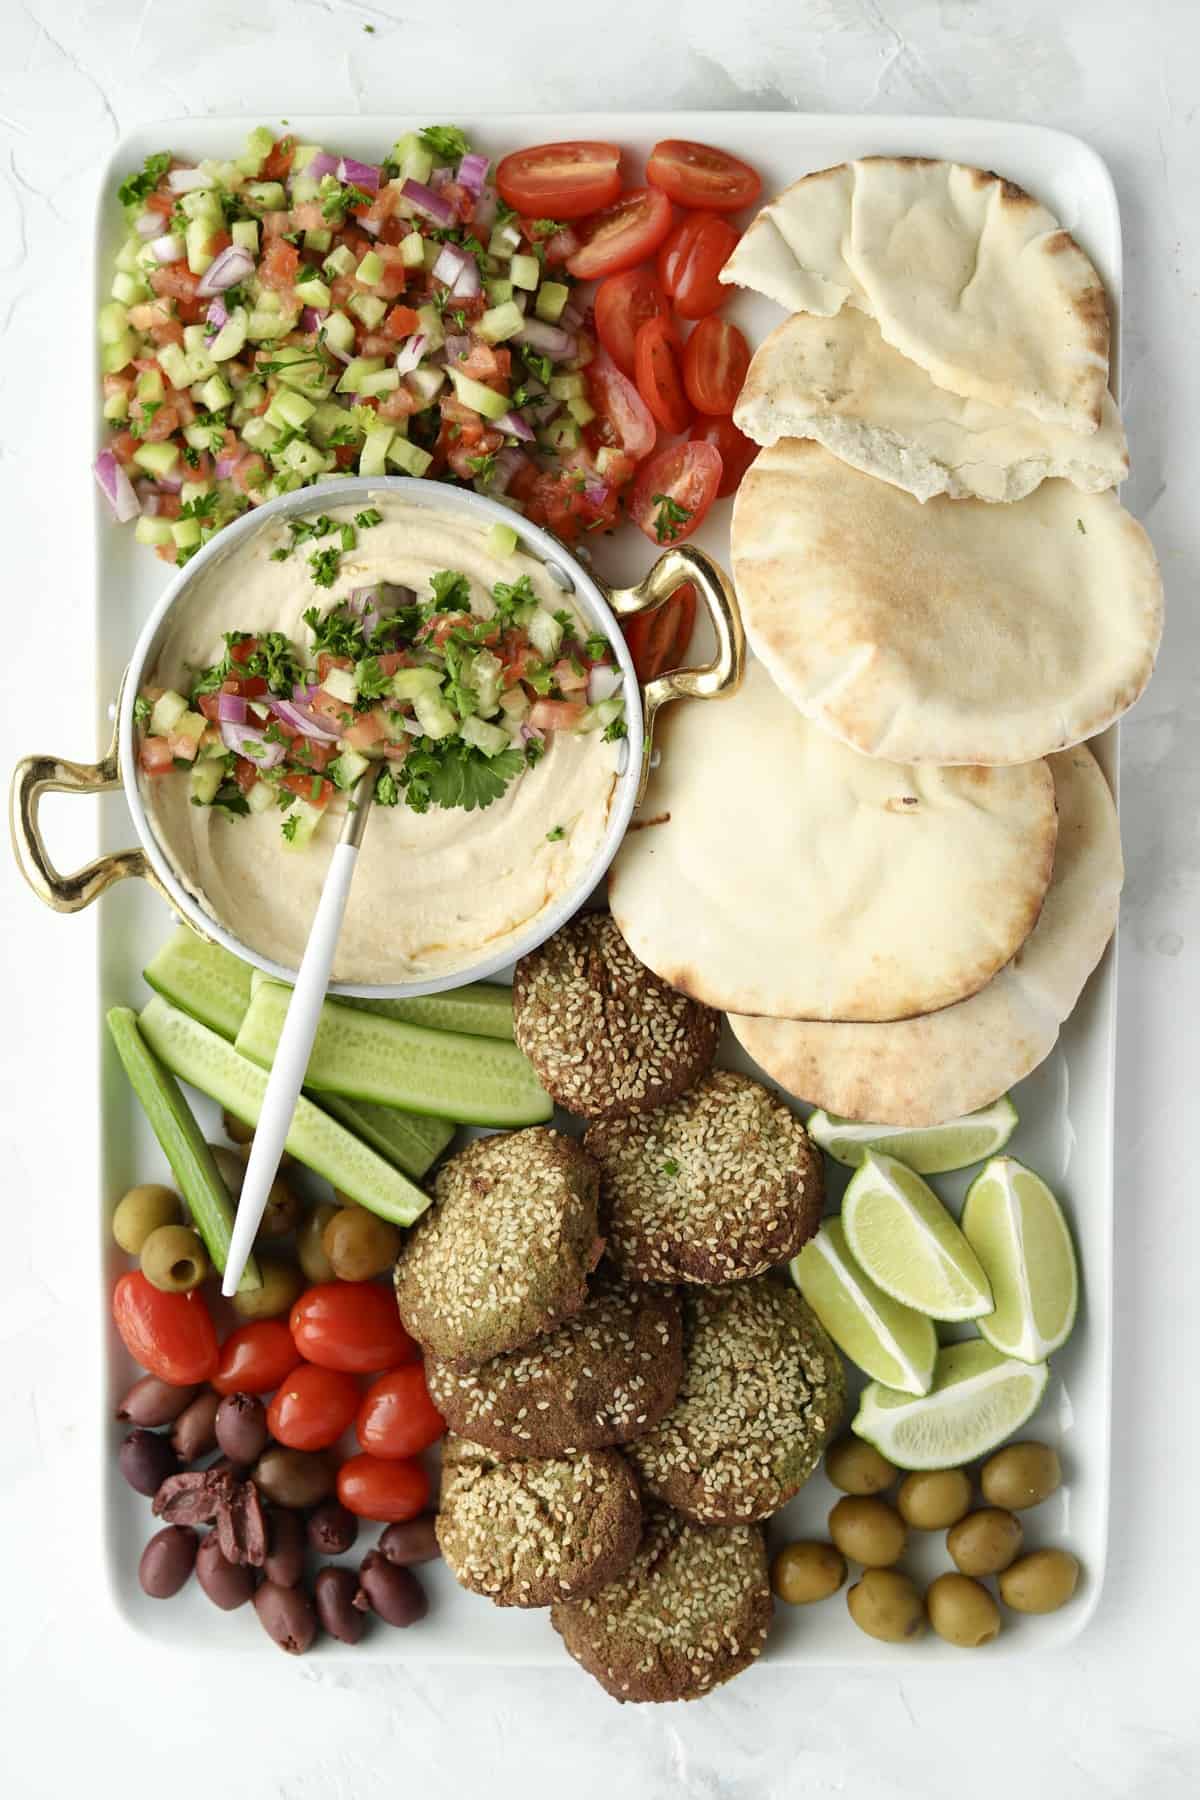 tray of falafel, hummus, and fixings